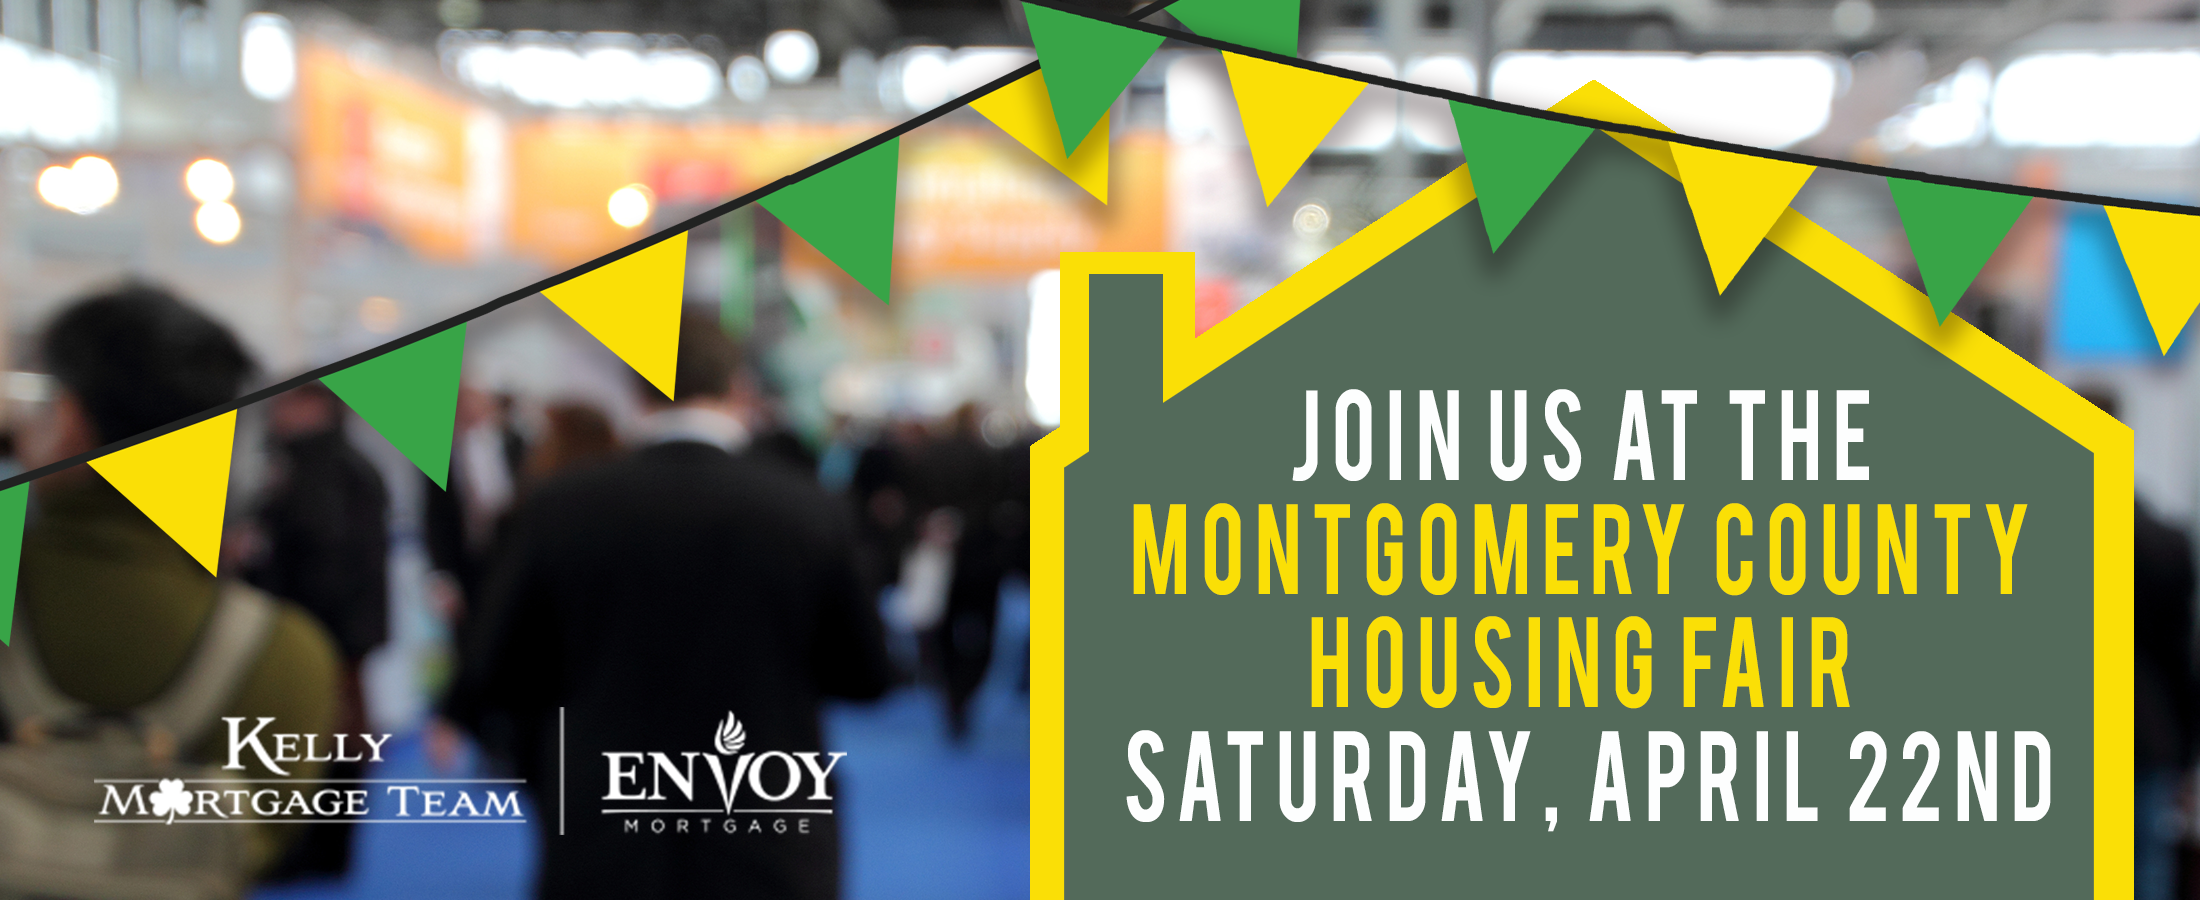 Join Mike Thompson at the Montgomery County Housing Fair!